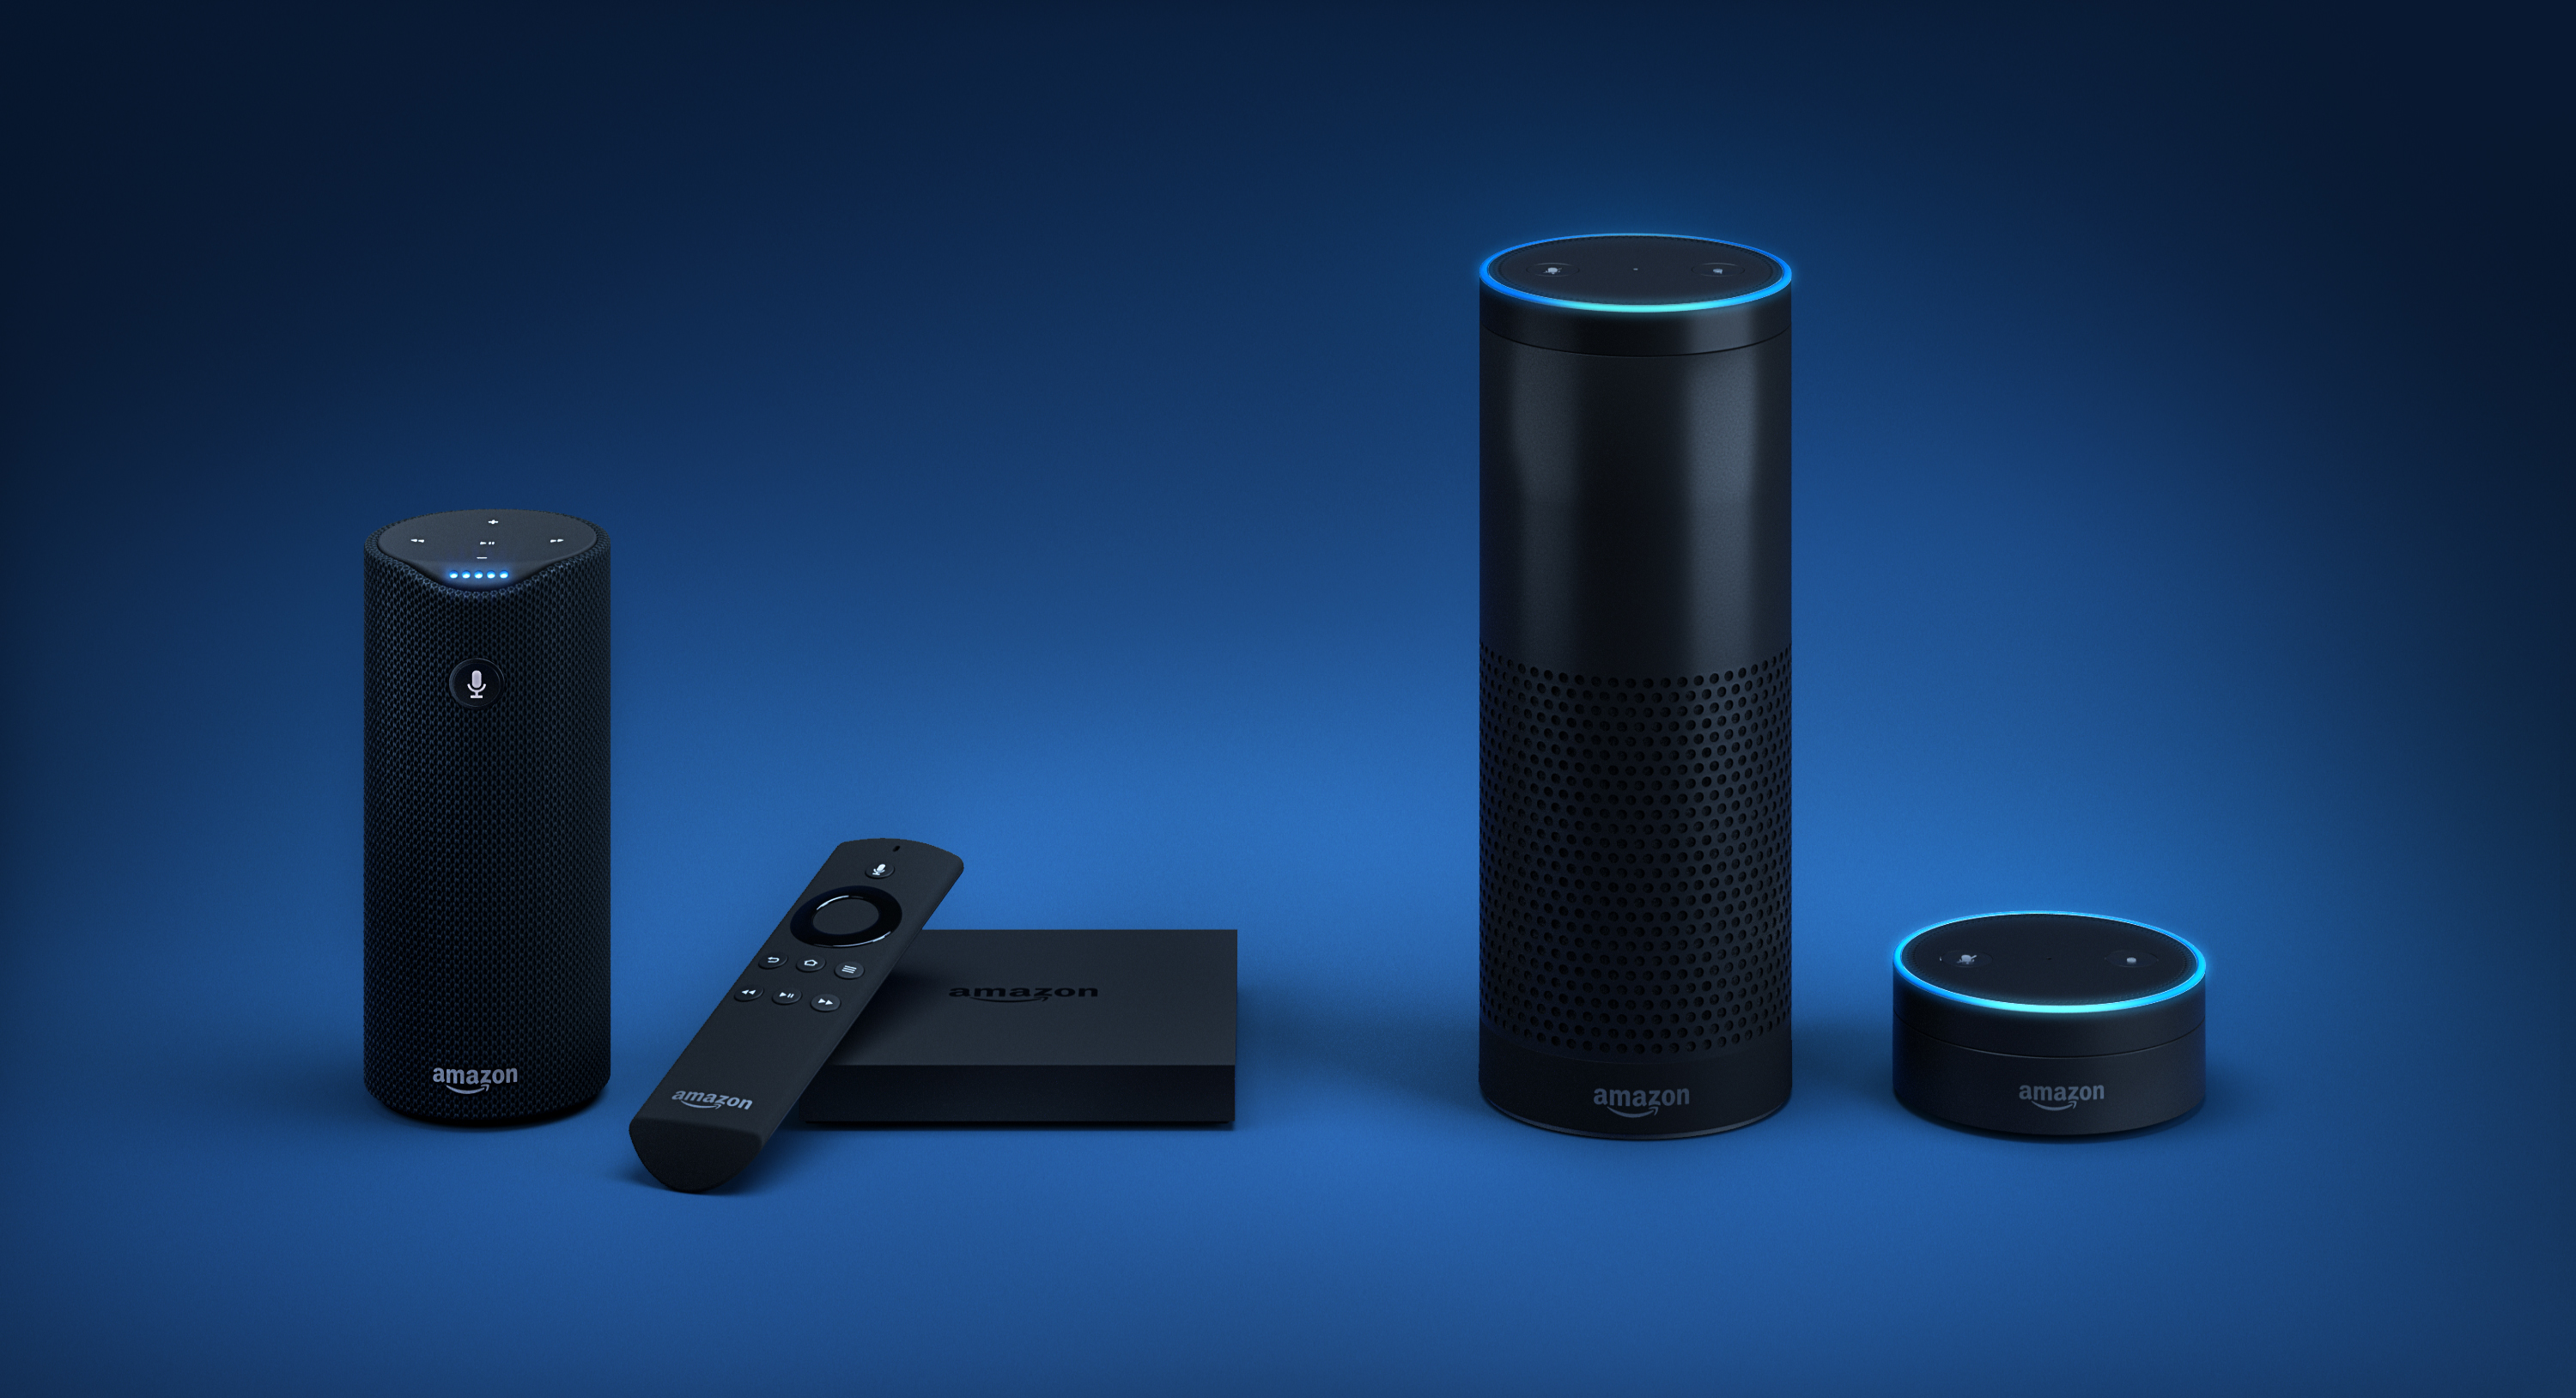 Capital One Will Let Customers Pay Bills, Access Account Info Using Amazon Echo